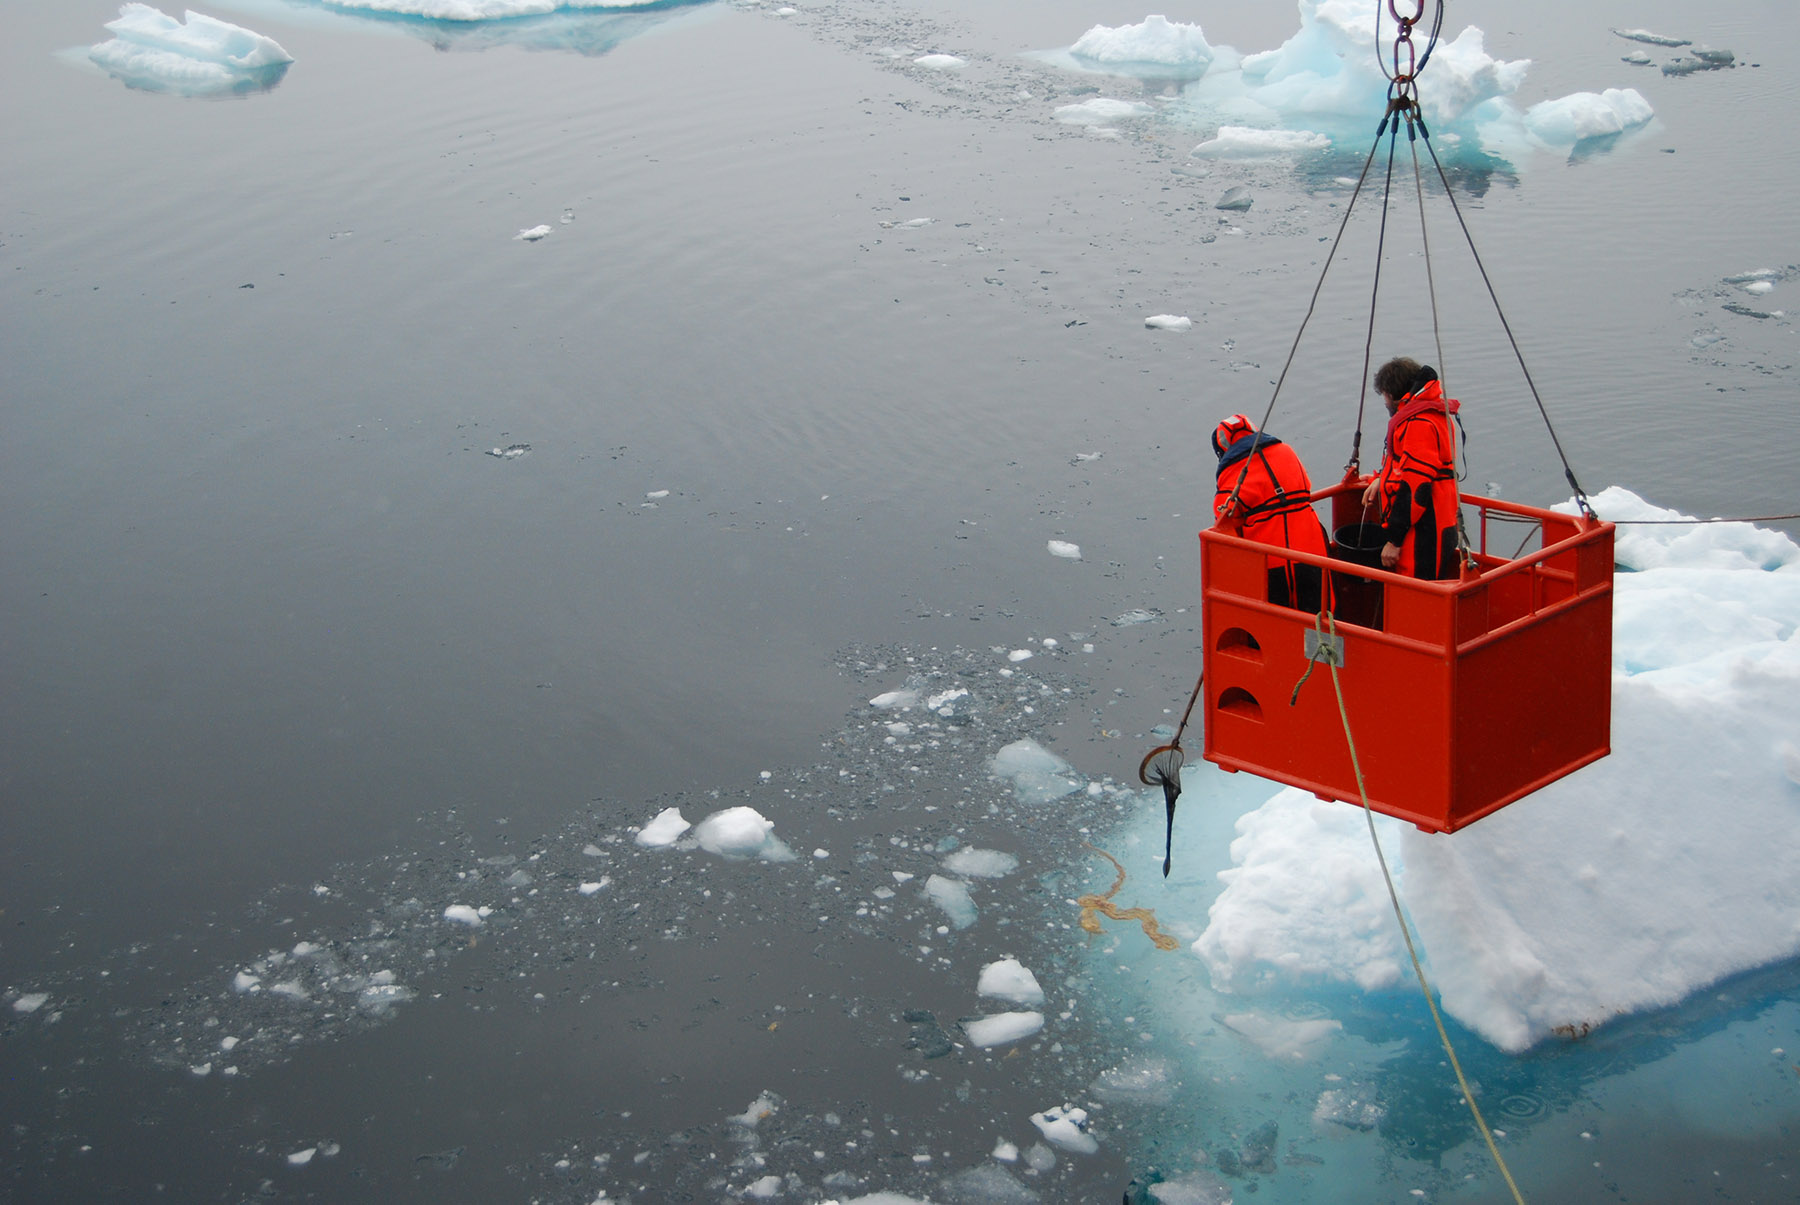 Researchers exploring the Antarctic as part of their Algal investigations